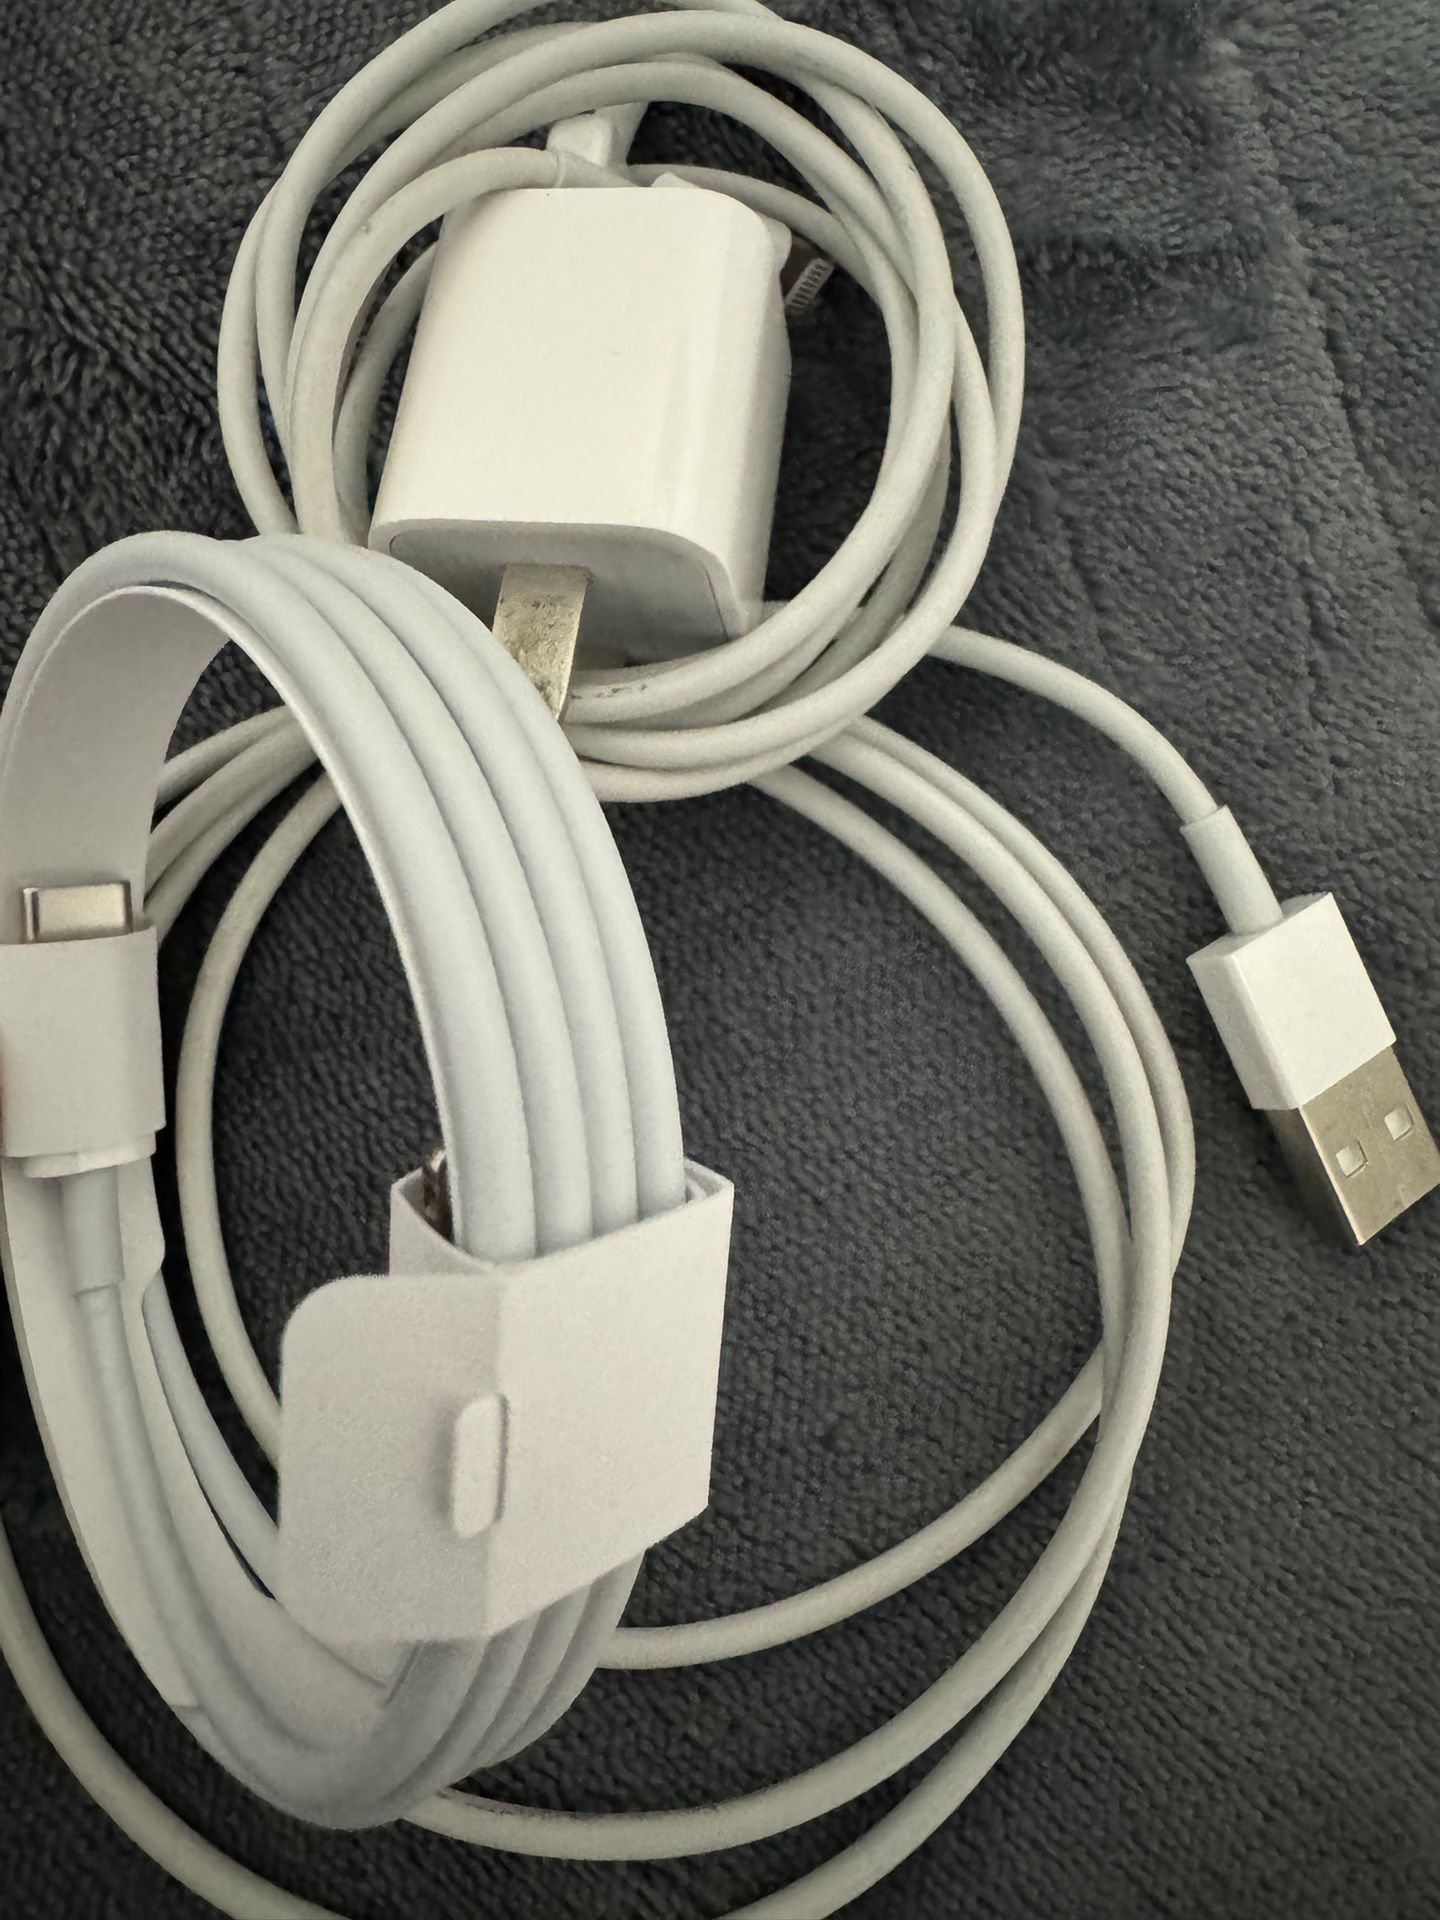 Apple Branded Lightning chargers 